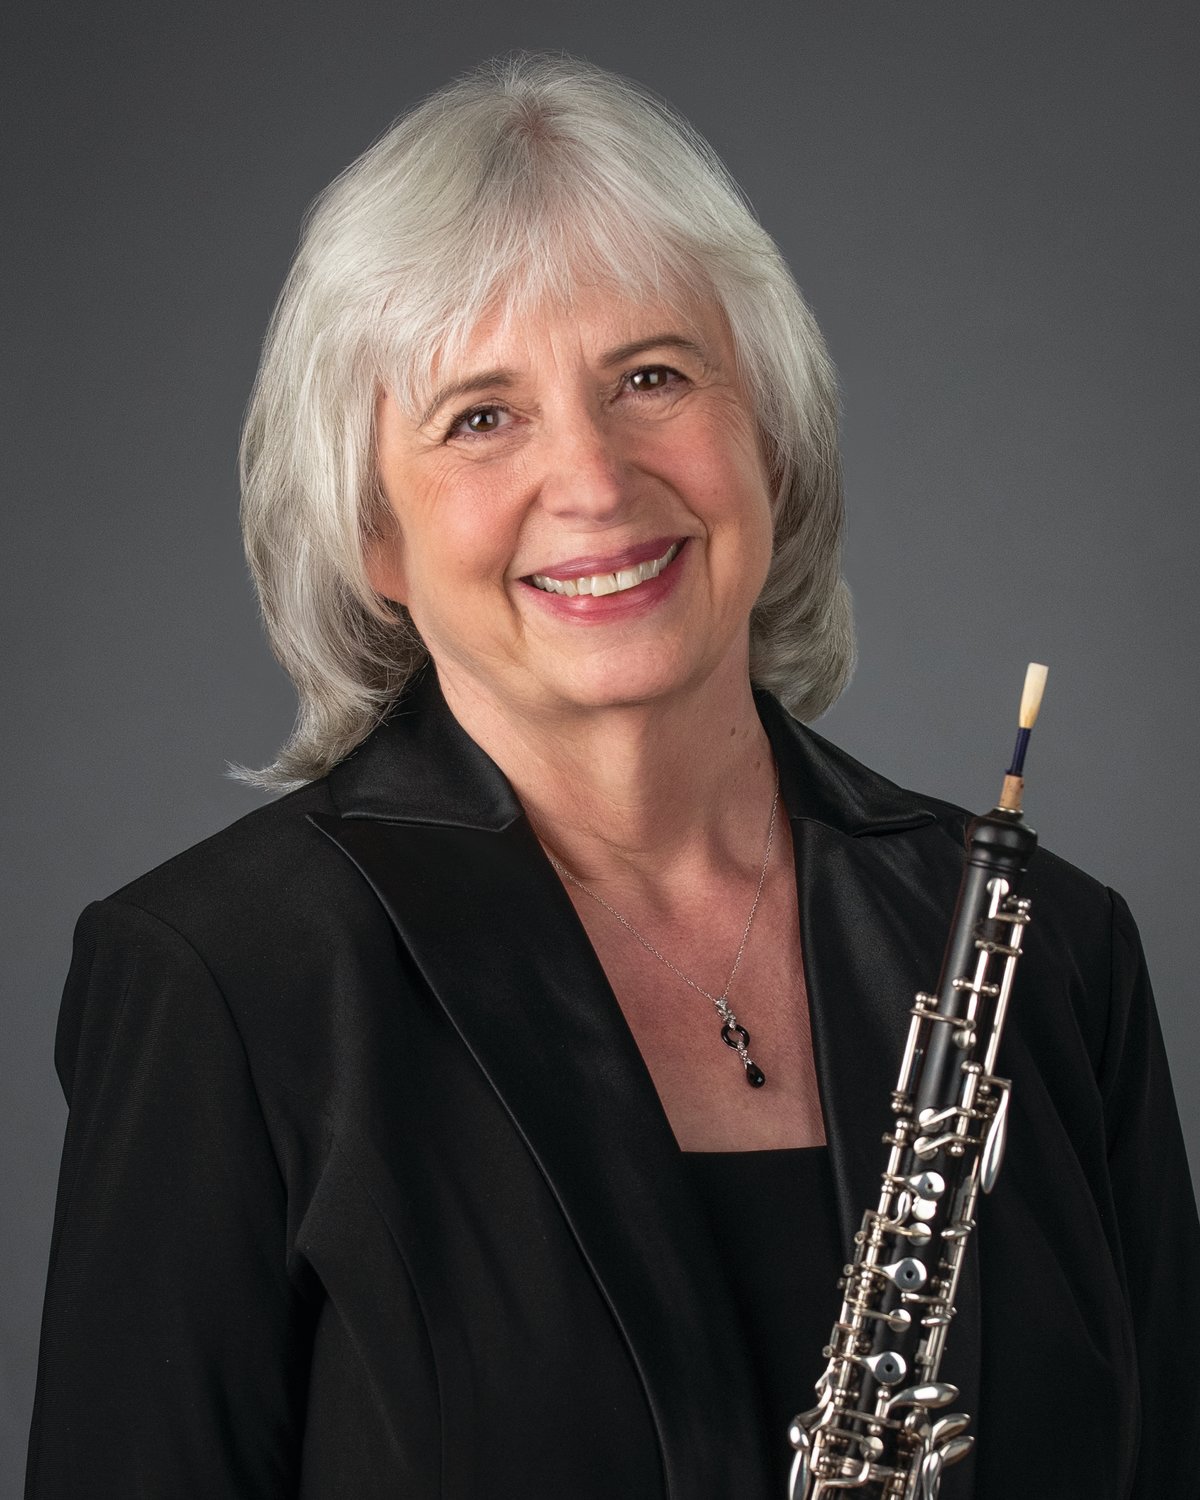 Oboe soloist Anne Krabill will perform an extended solo for the groups' second piece. Krabill is a Port Townsend resident and principle player for the Port Angeles Symphony Orchestra.